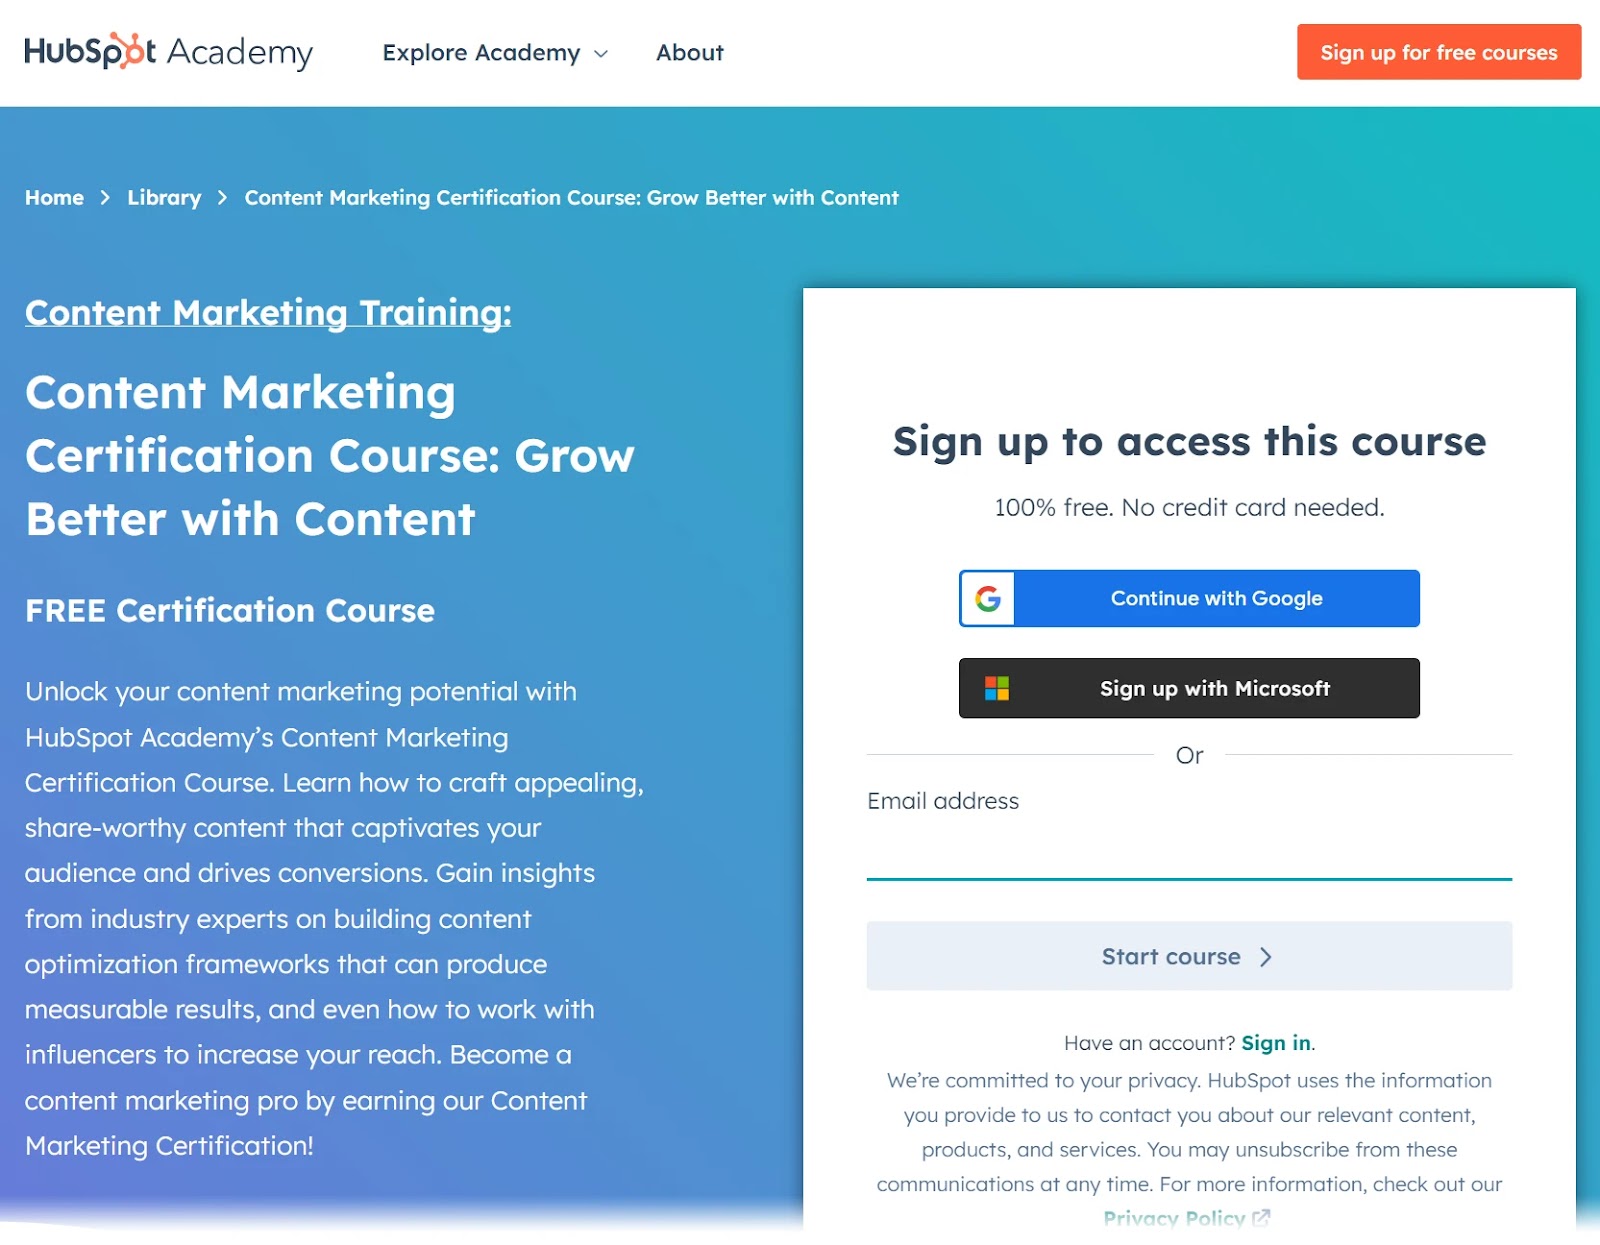 Content Marketing Certification Course landing page